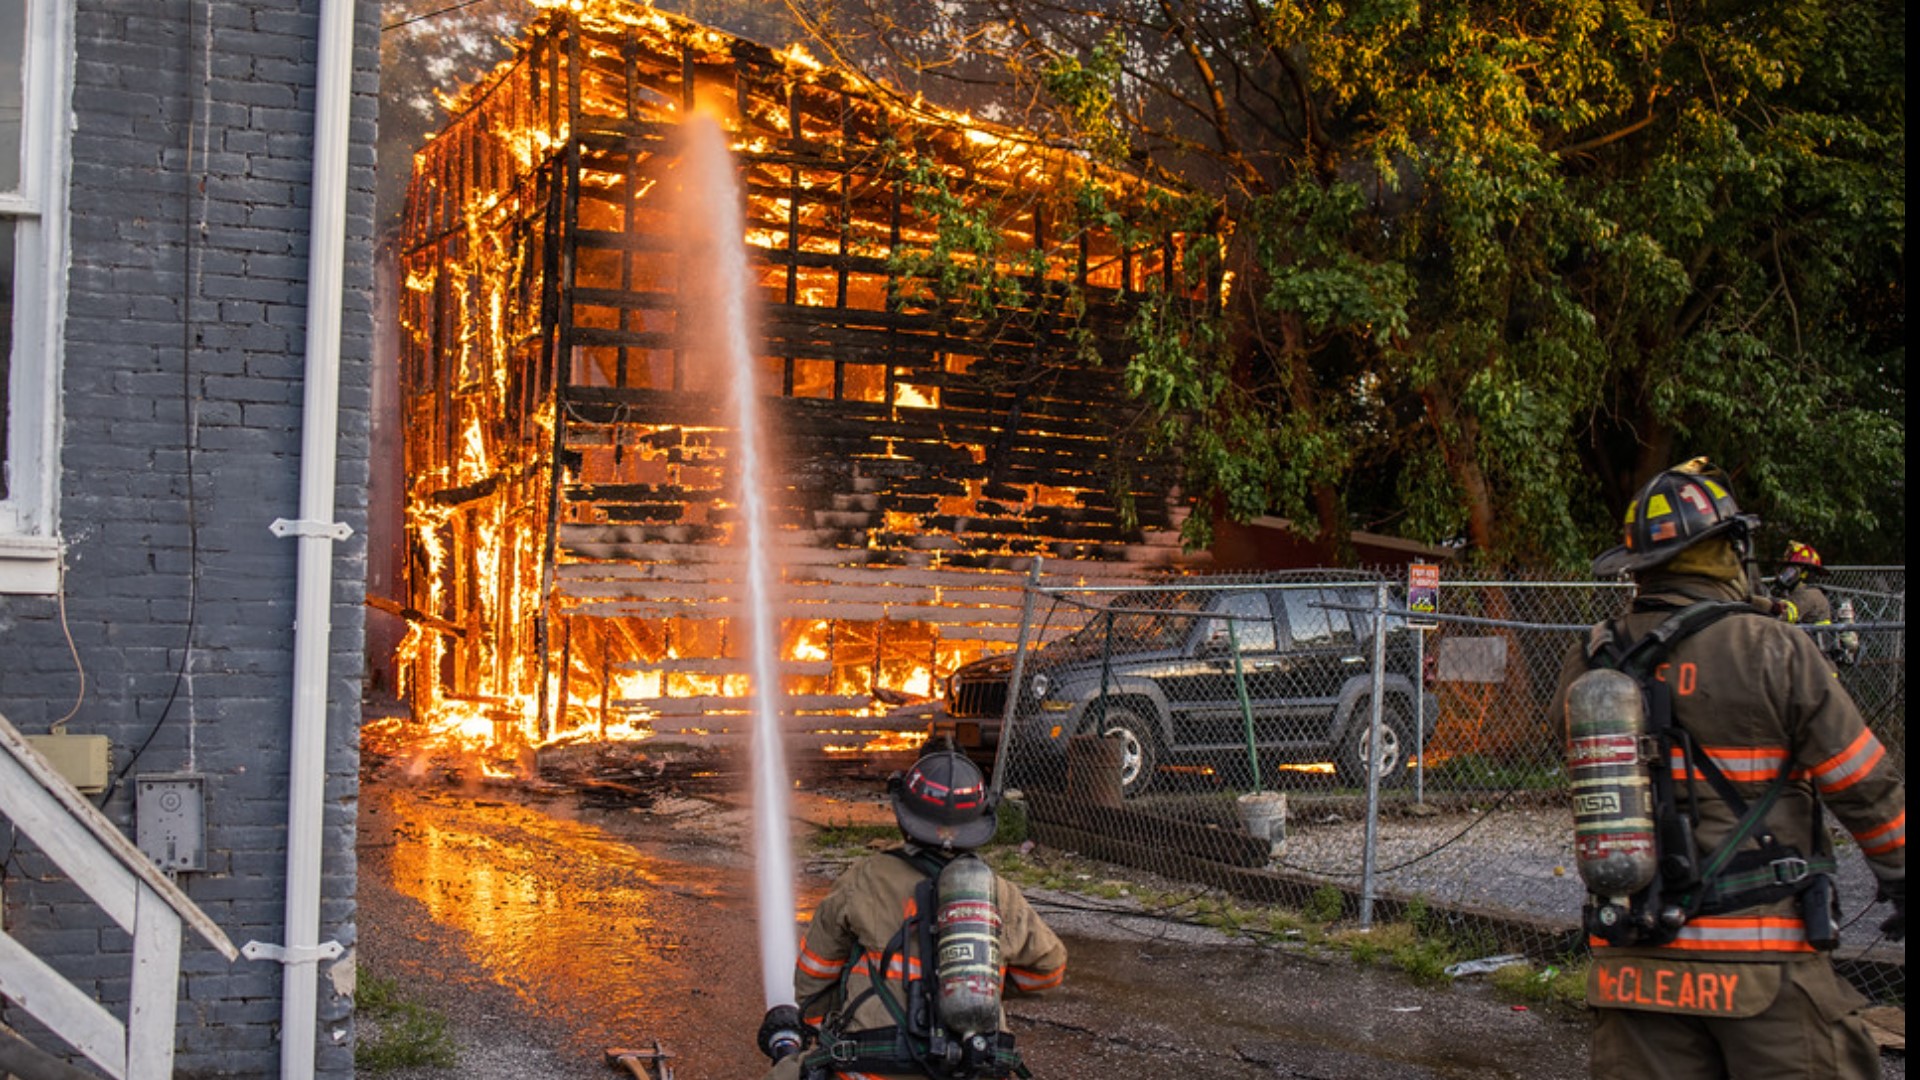 What has been described as an innocent activity is what fire officials say ultimately caused the flames which scared neighbors and damaged homes and cars in York.